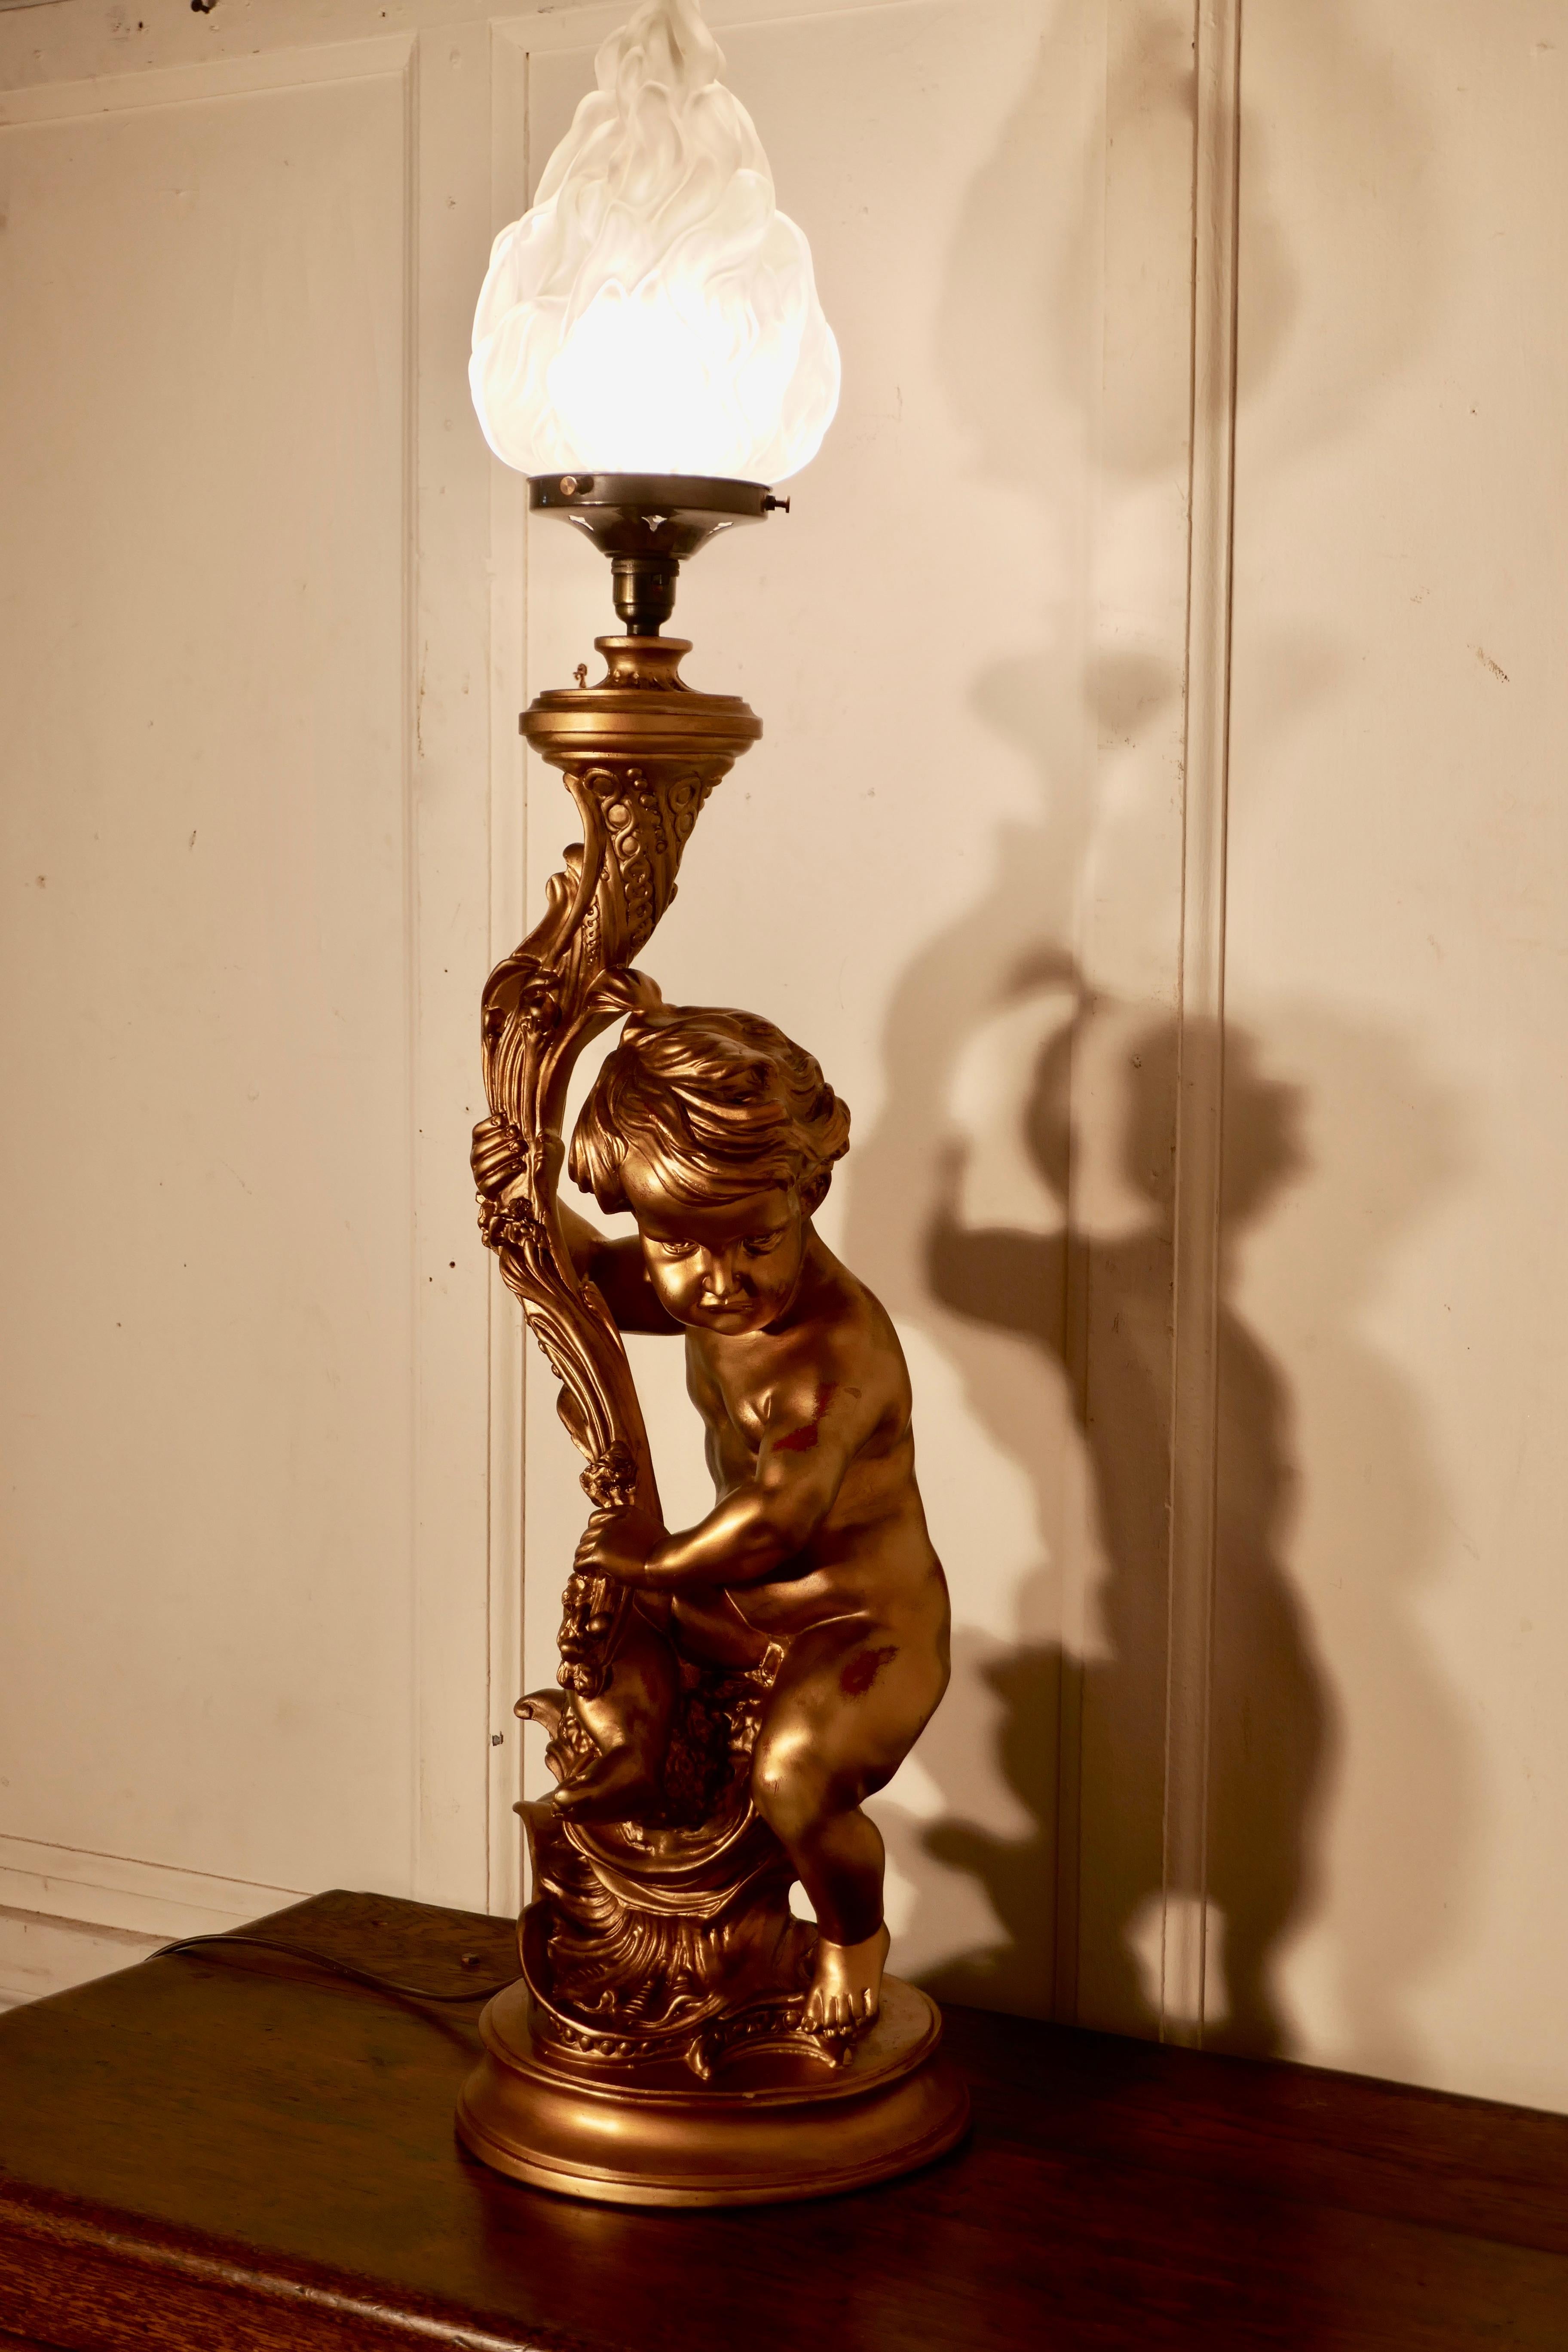 Very large gilt table lamp in the form of a cherub or putti

This charming figure is in gold and is set on a circular plinth, the cherub is holding a glass Art Deco flame lamp shade
The lamp is in good condition, there is some wear to the gilt